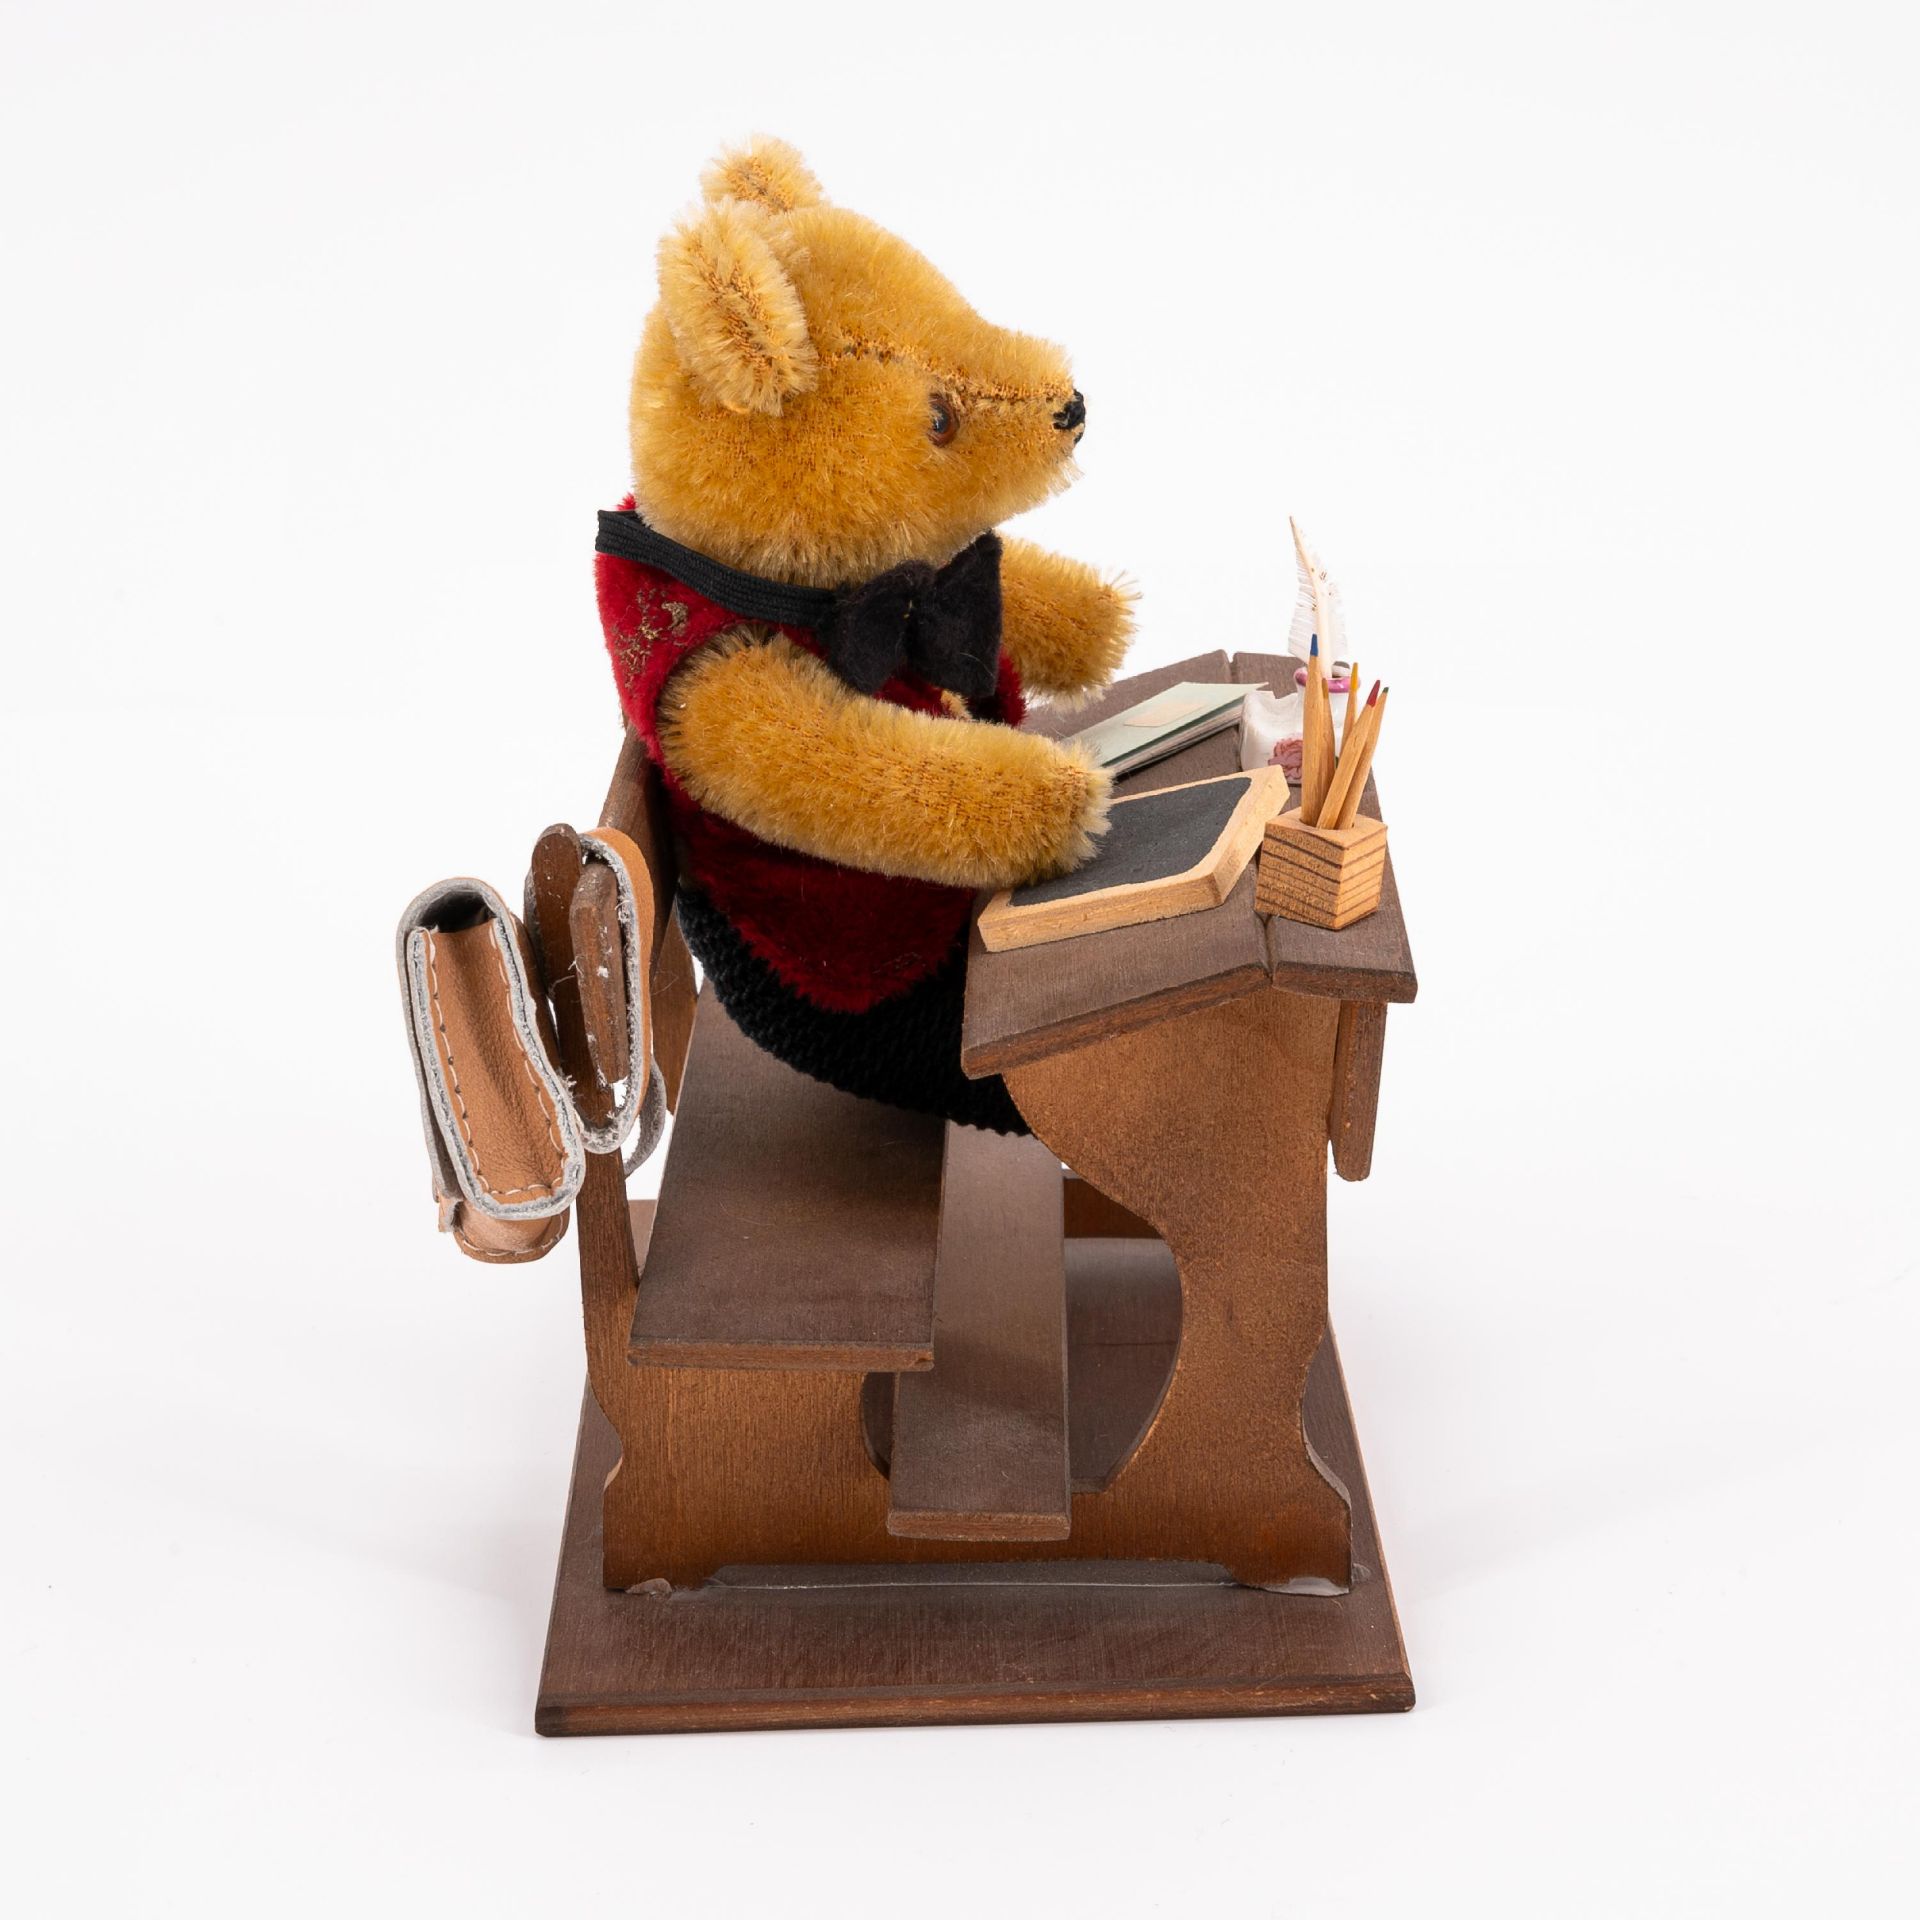 Steiff: ENSEMBLE OF FOUR STEIFF ANIMALS MADE OF FABRIC, COTTON WOOL AND WOOD - Image 4 of 10